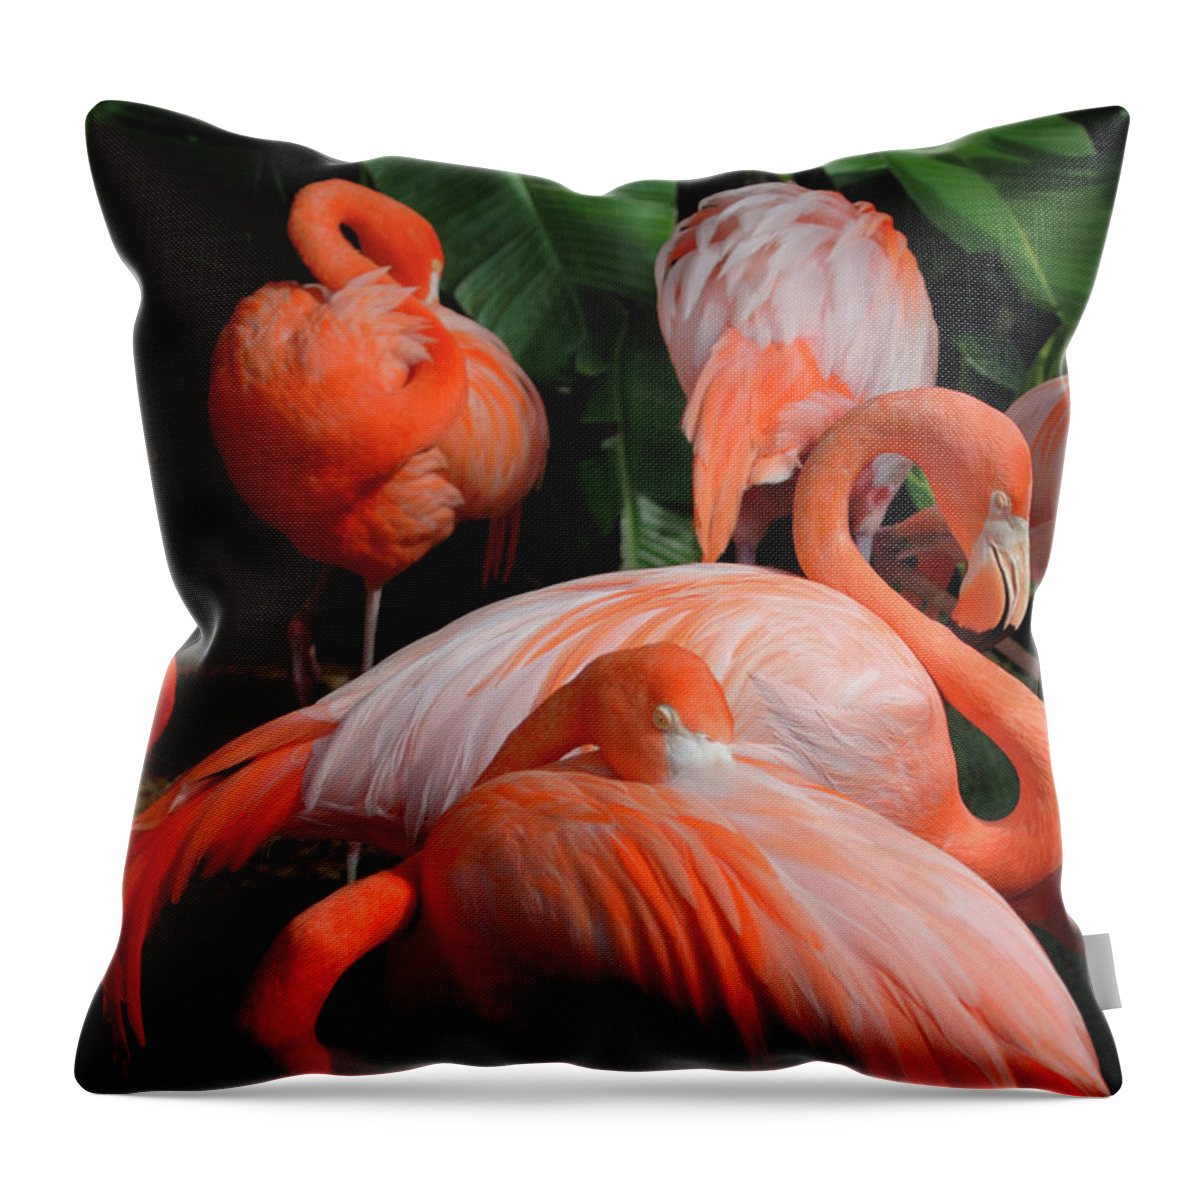 Animal Wing Throw Pillow featuring the photograph Sleeping Pink Flamingo Surrounded By by Deborahmaxemow